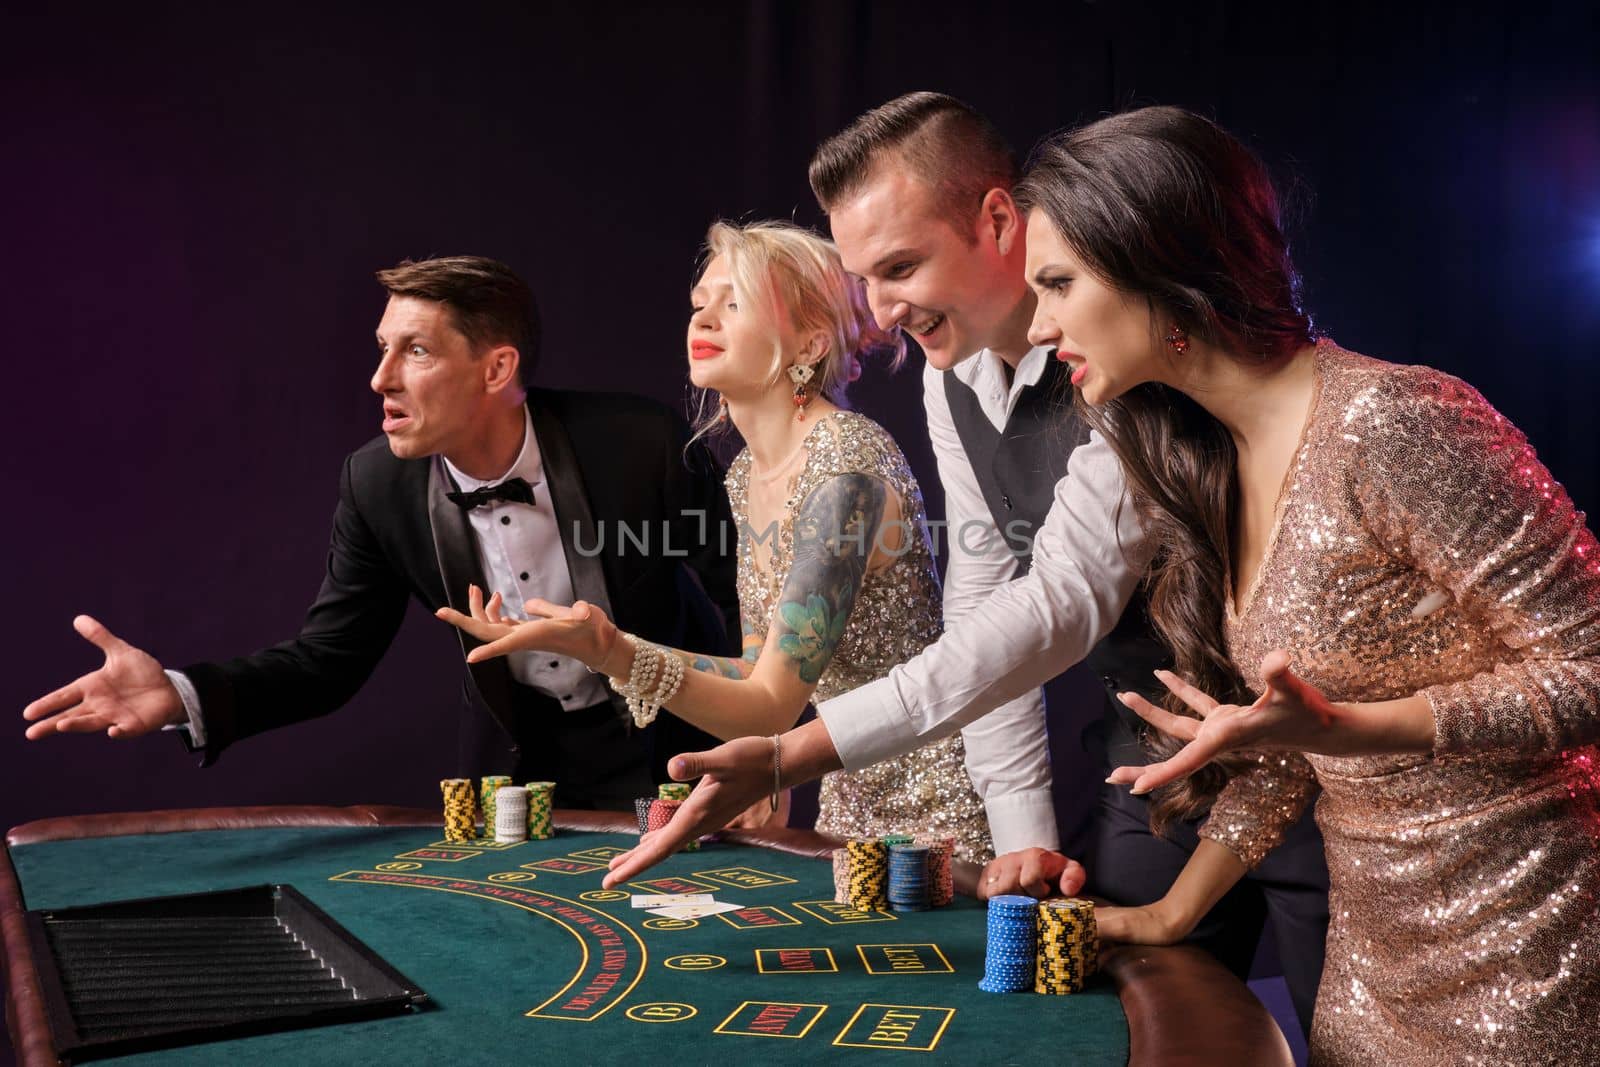 Side shot of a confused rich friends playing poker at casino. Youth have lose. They are looking disappointed standing at the table against a red and blue backlights on black background. Risky gambling entertainment.